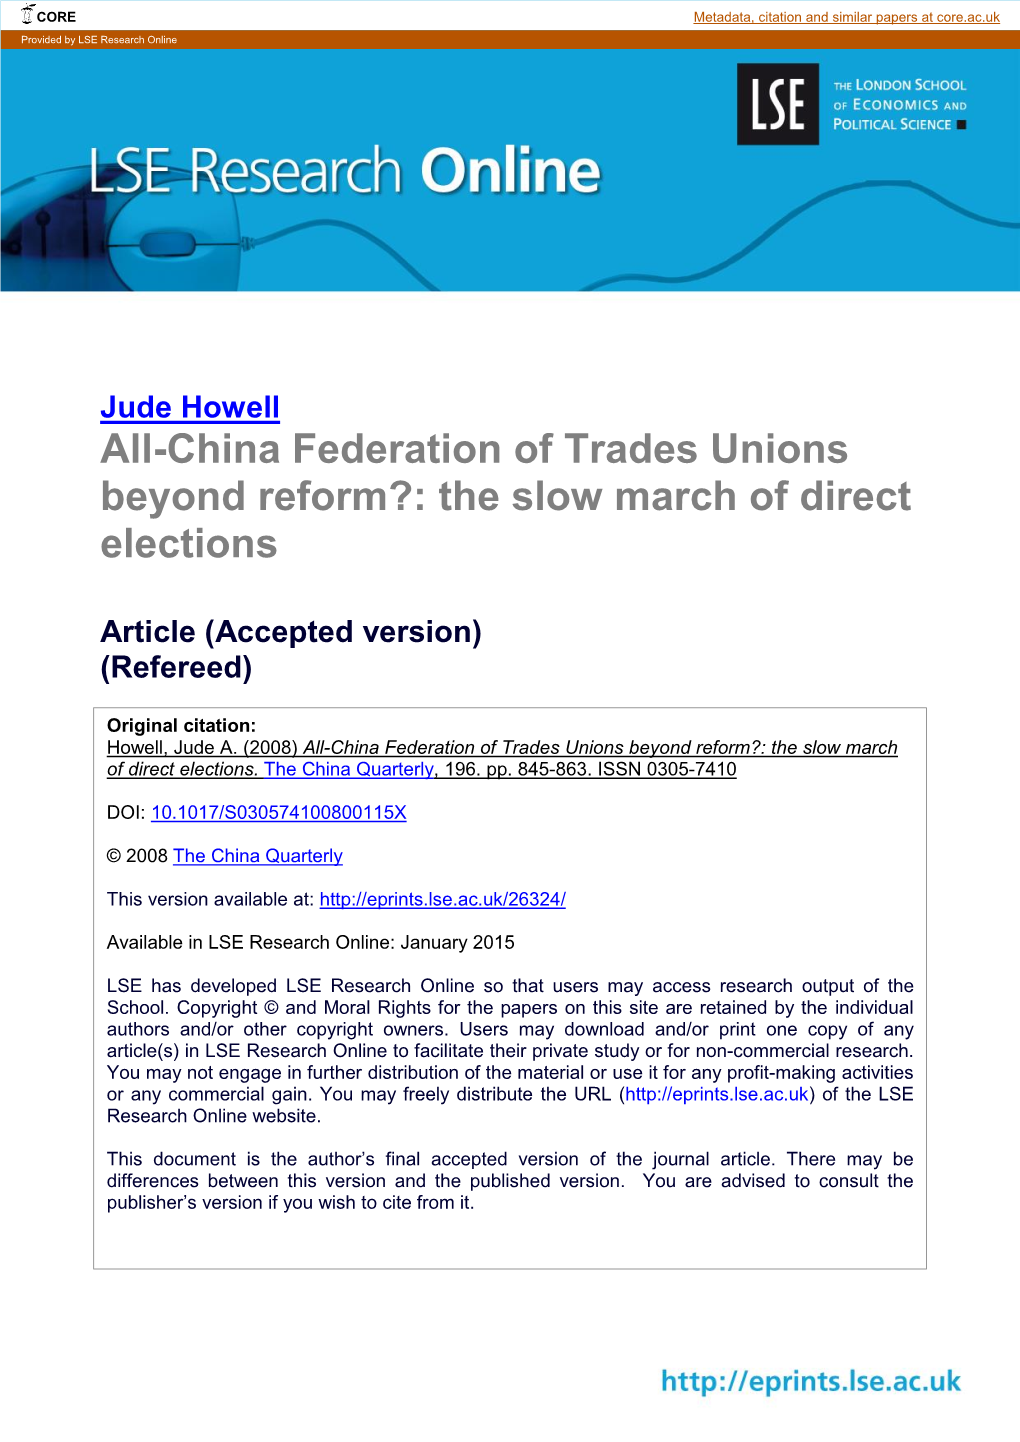 All-China Federation of Trades Unions Beyond Reform?: the Slow March of Direct Elections